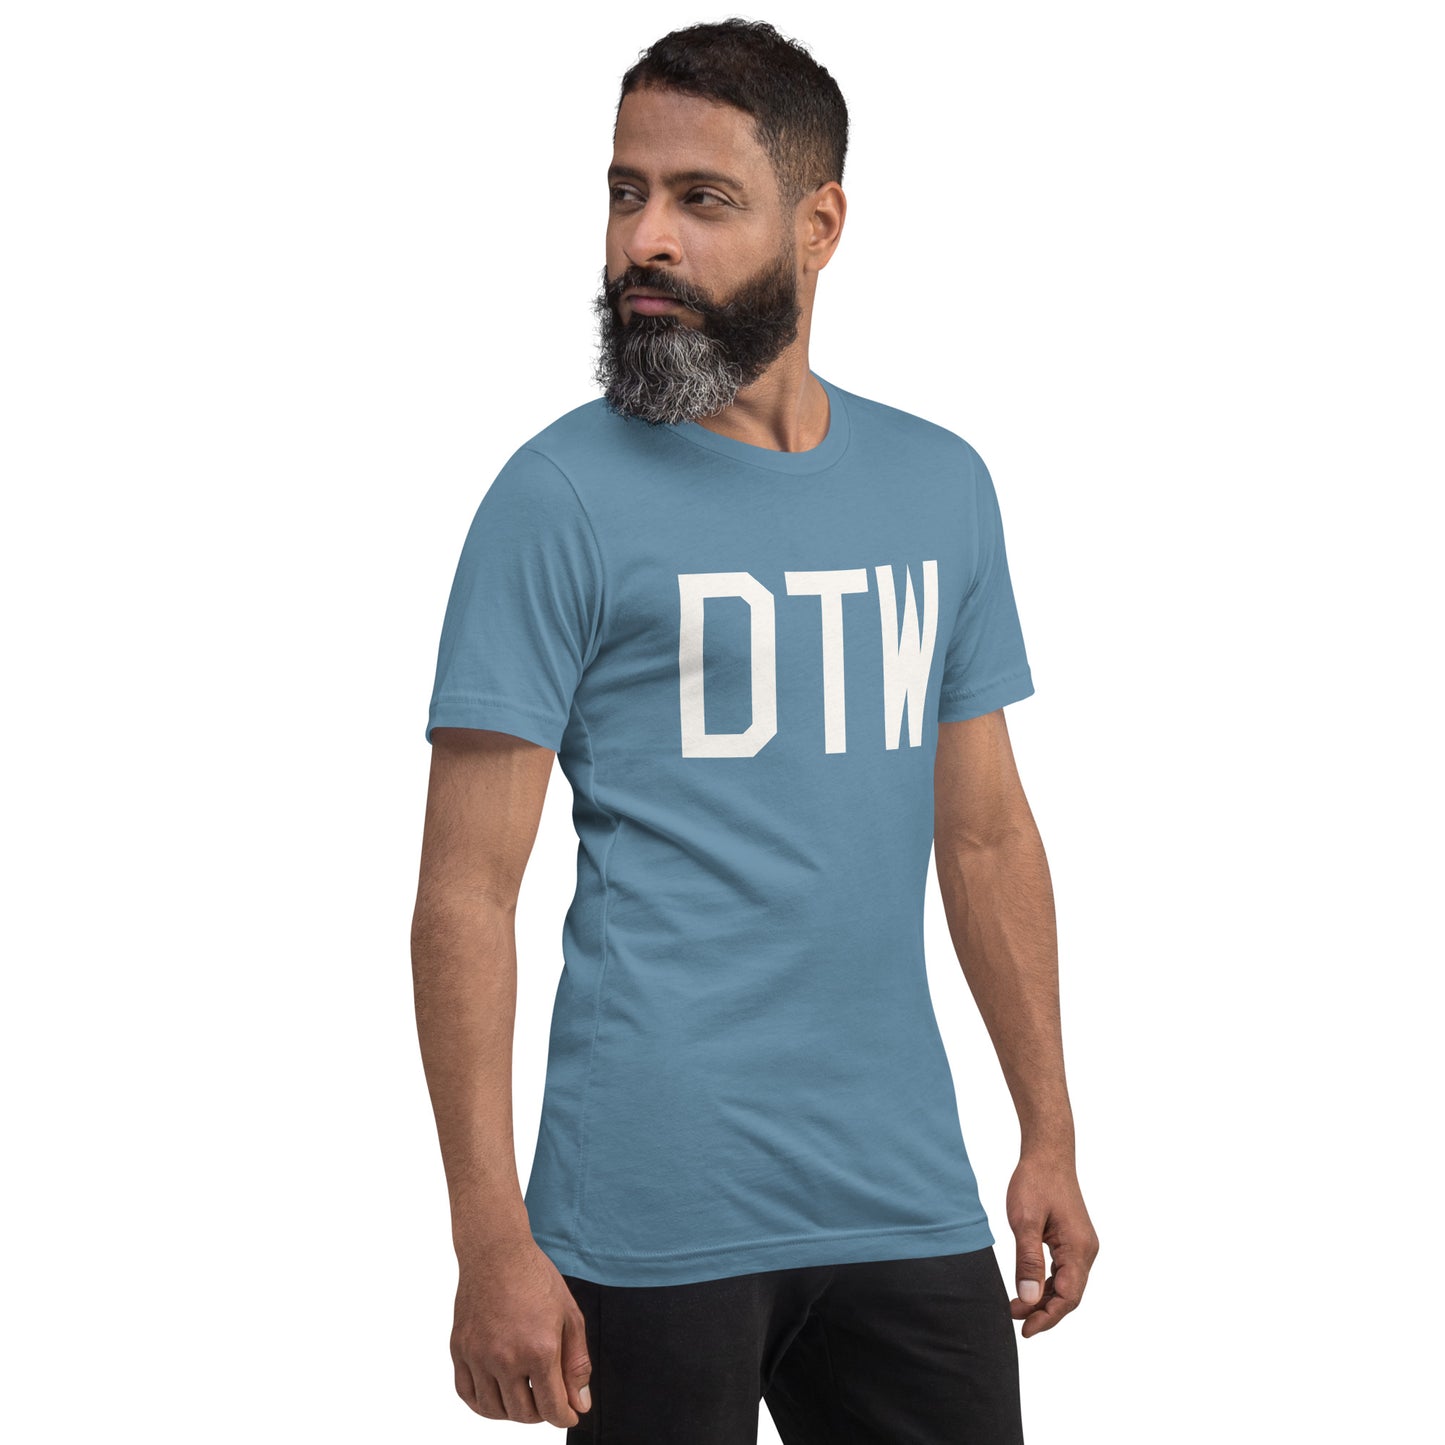 Airport Code T-Shirt - White Graphic • DTW Detroit • YHM Designs - Image 10